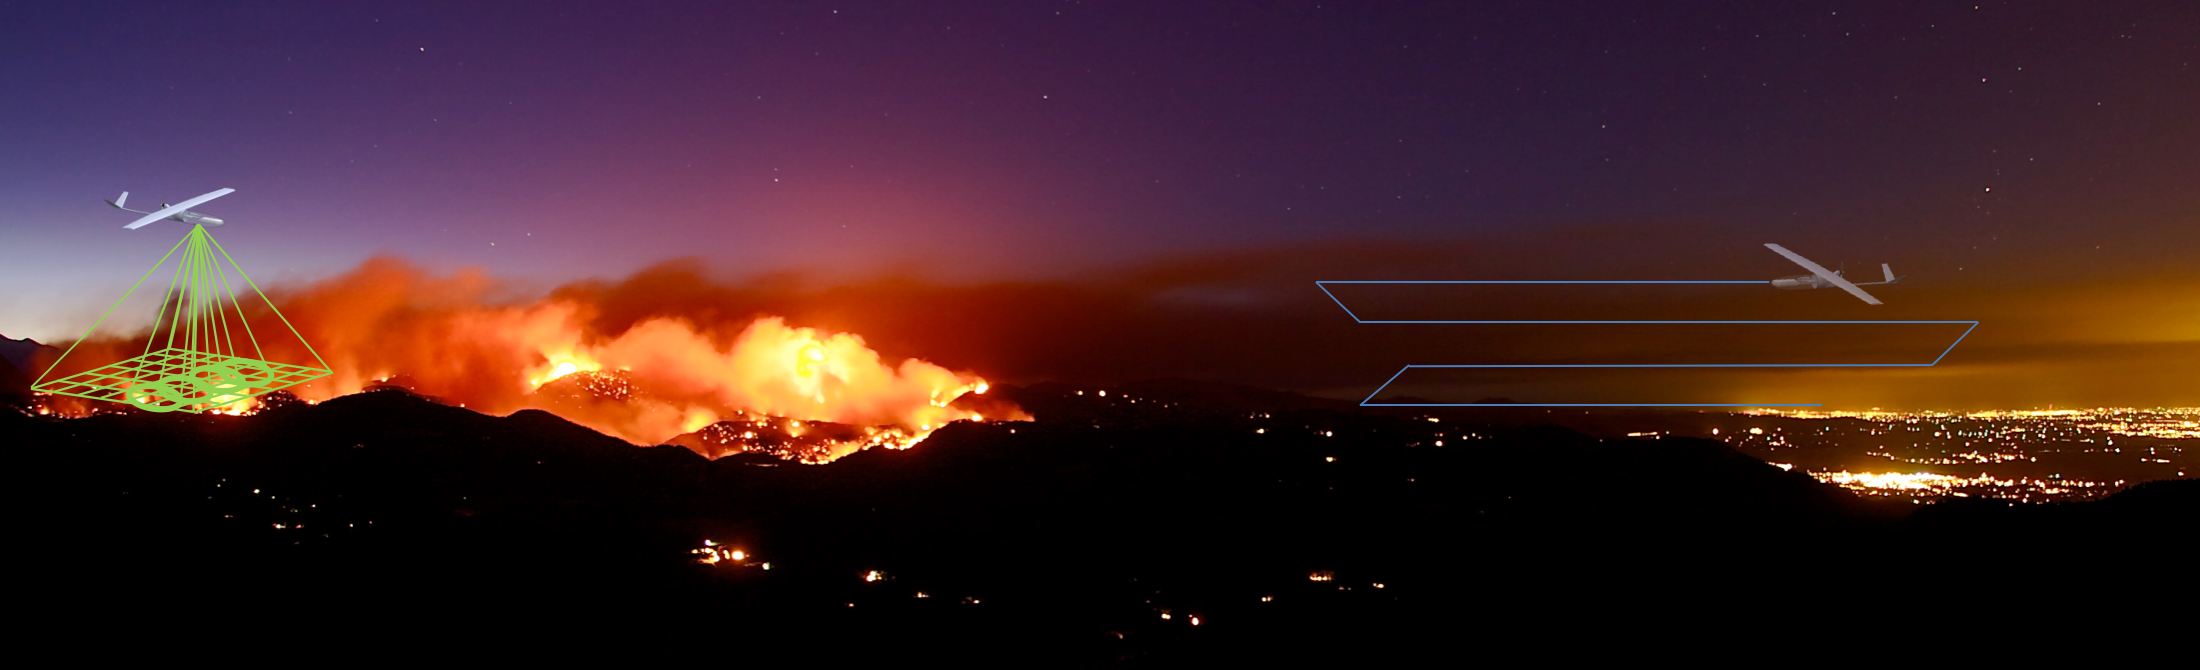 nighttime wildfire observations with UAS